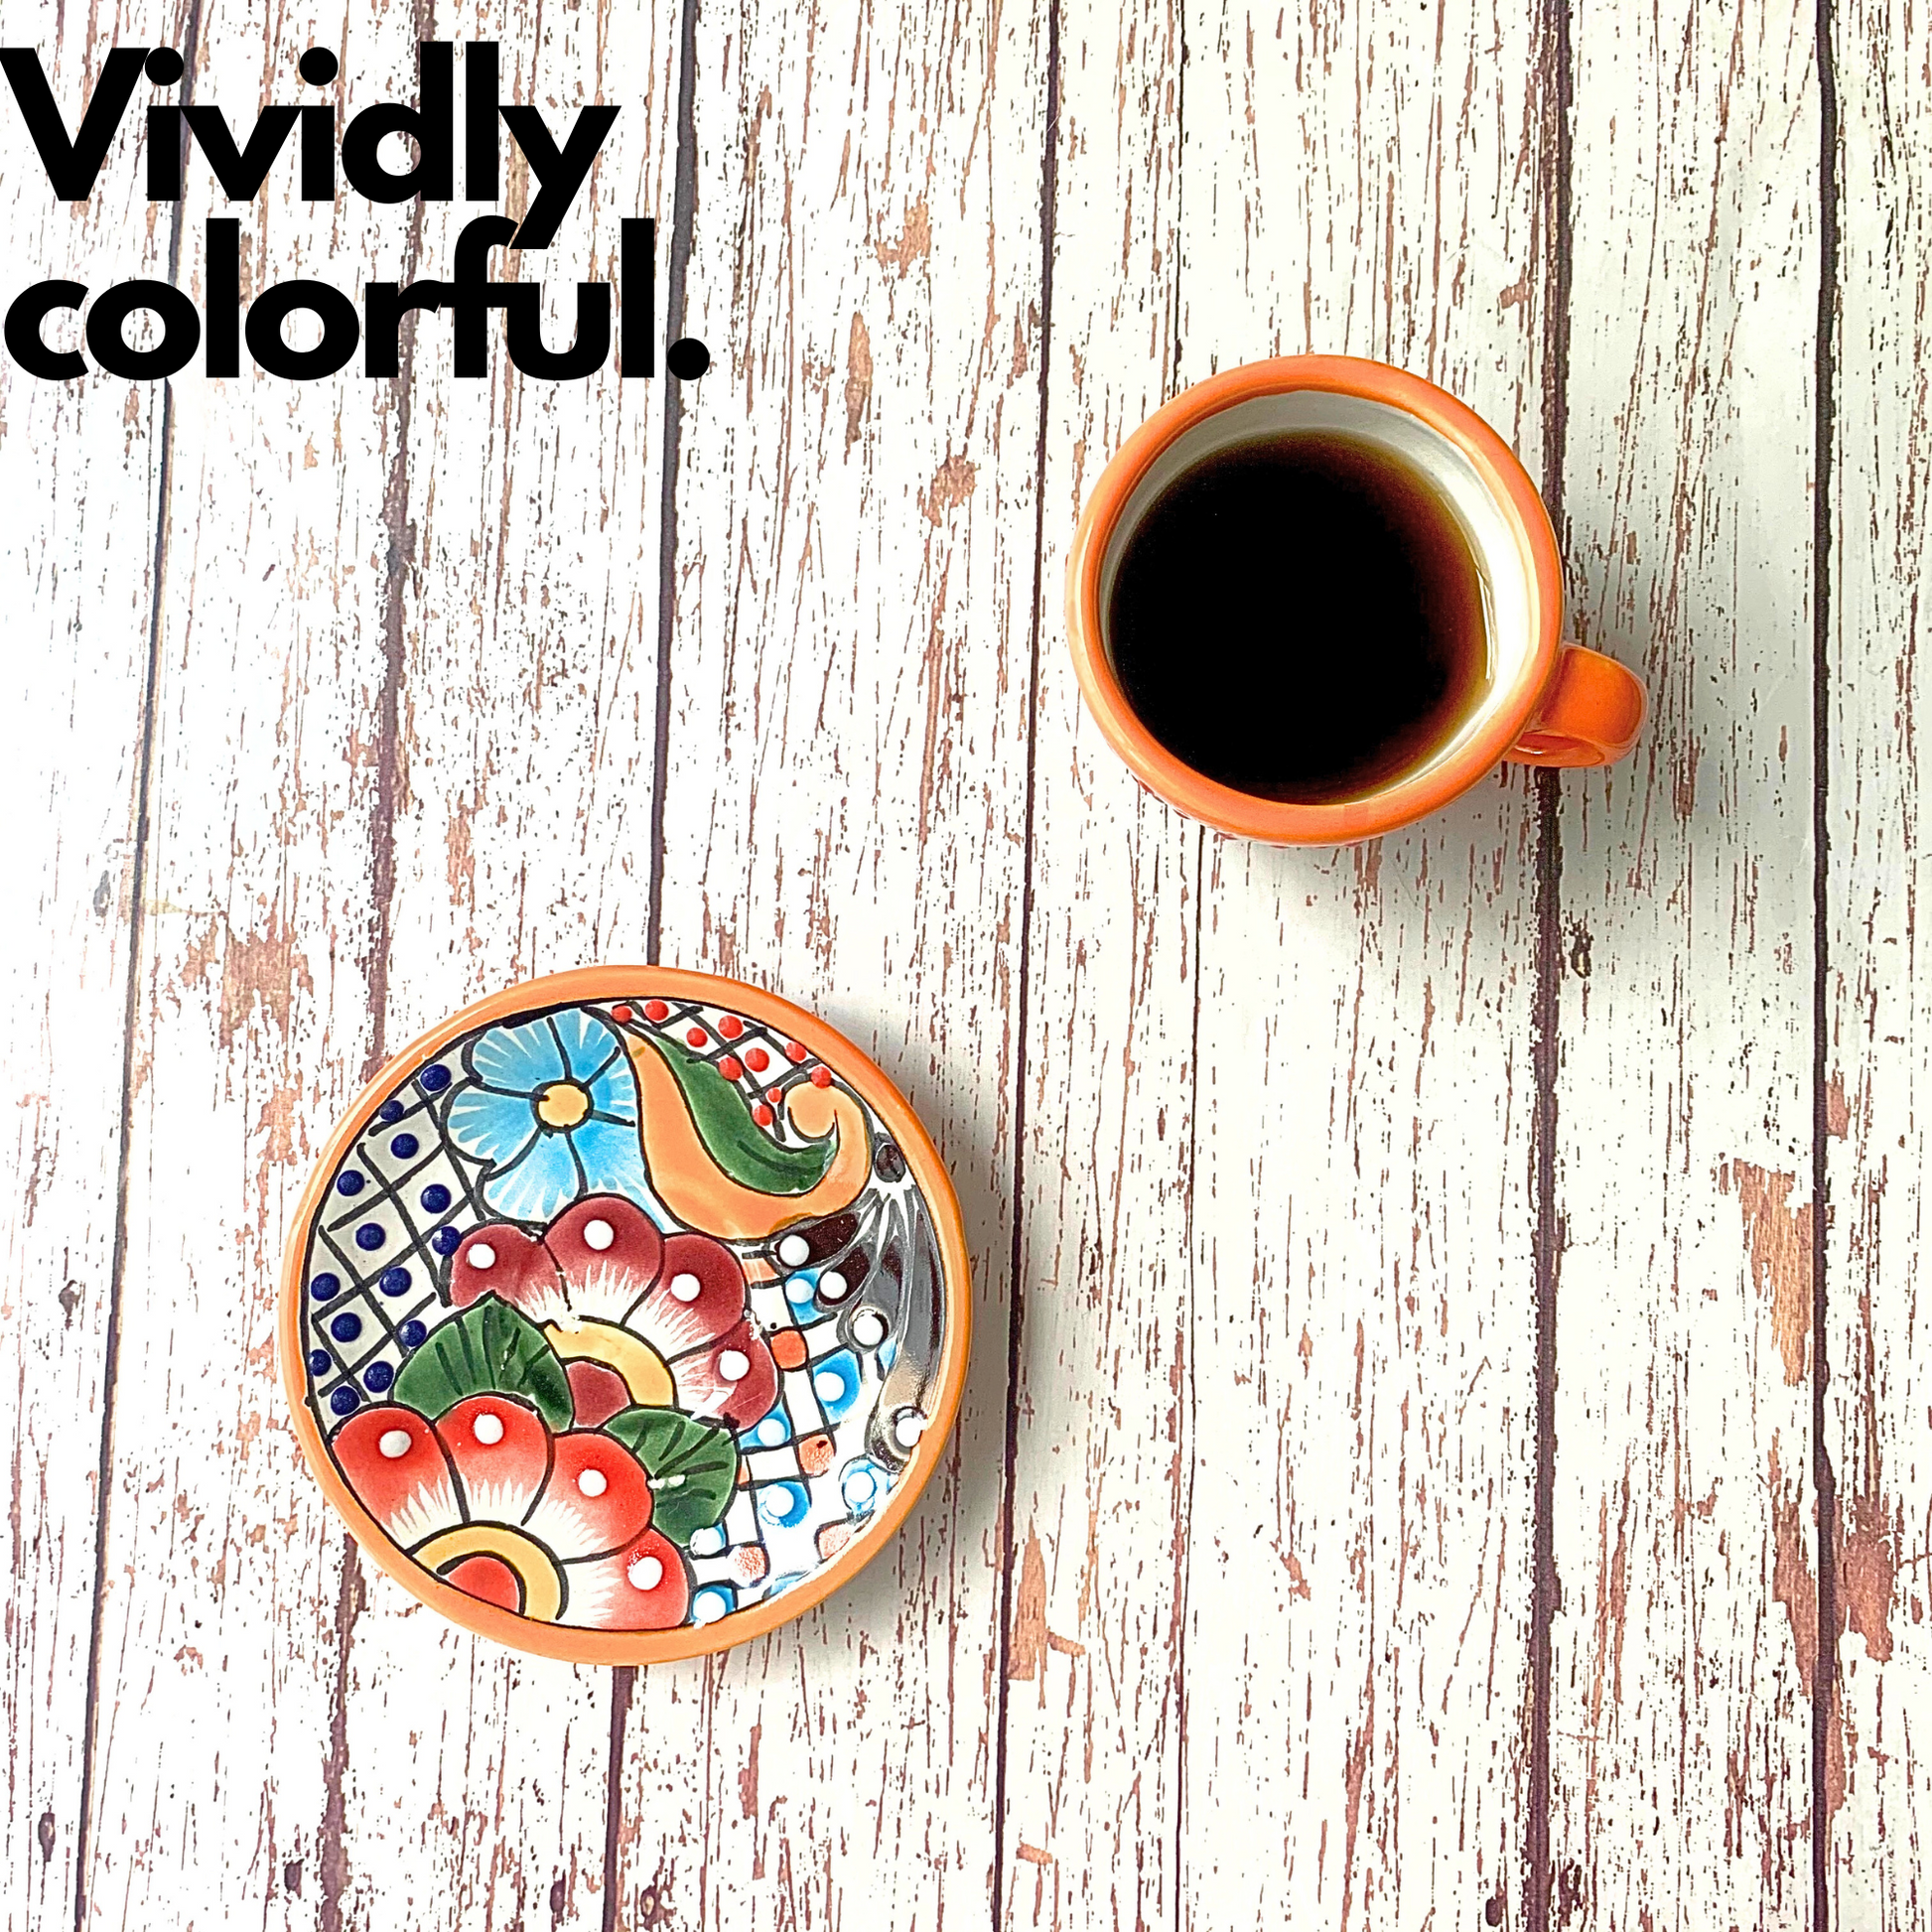 Handmade and hand-painted Mexican Talavera Ceramic Espresso Cup and Saucer set with vibrant floral pattern.